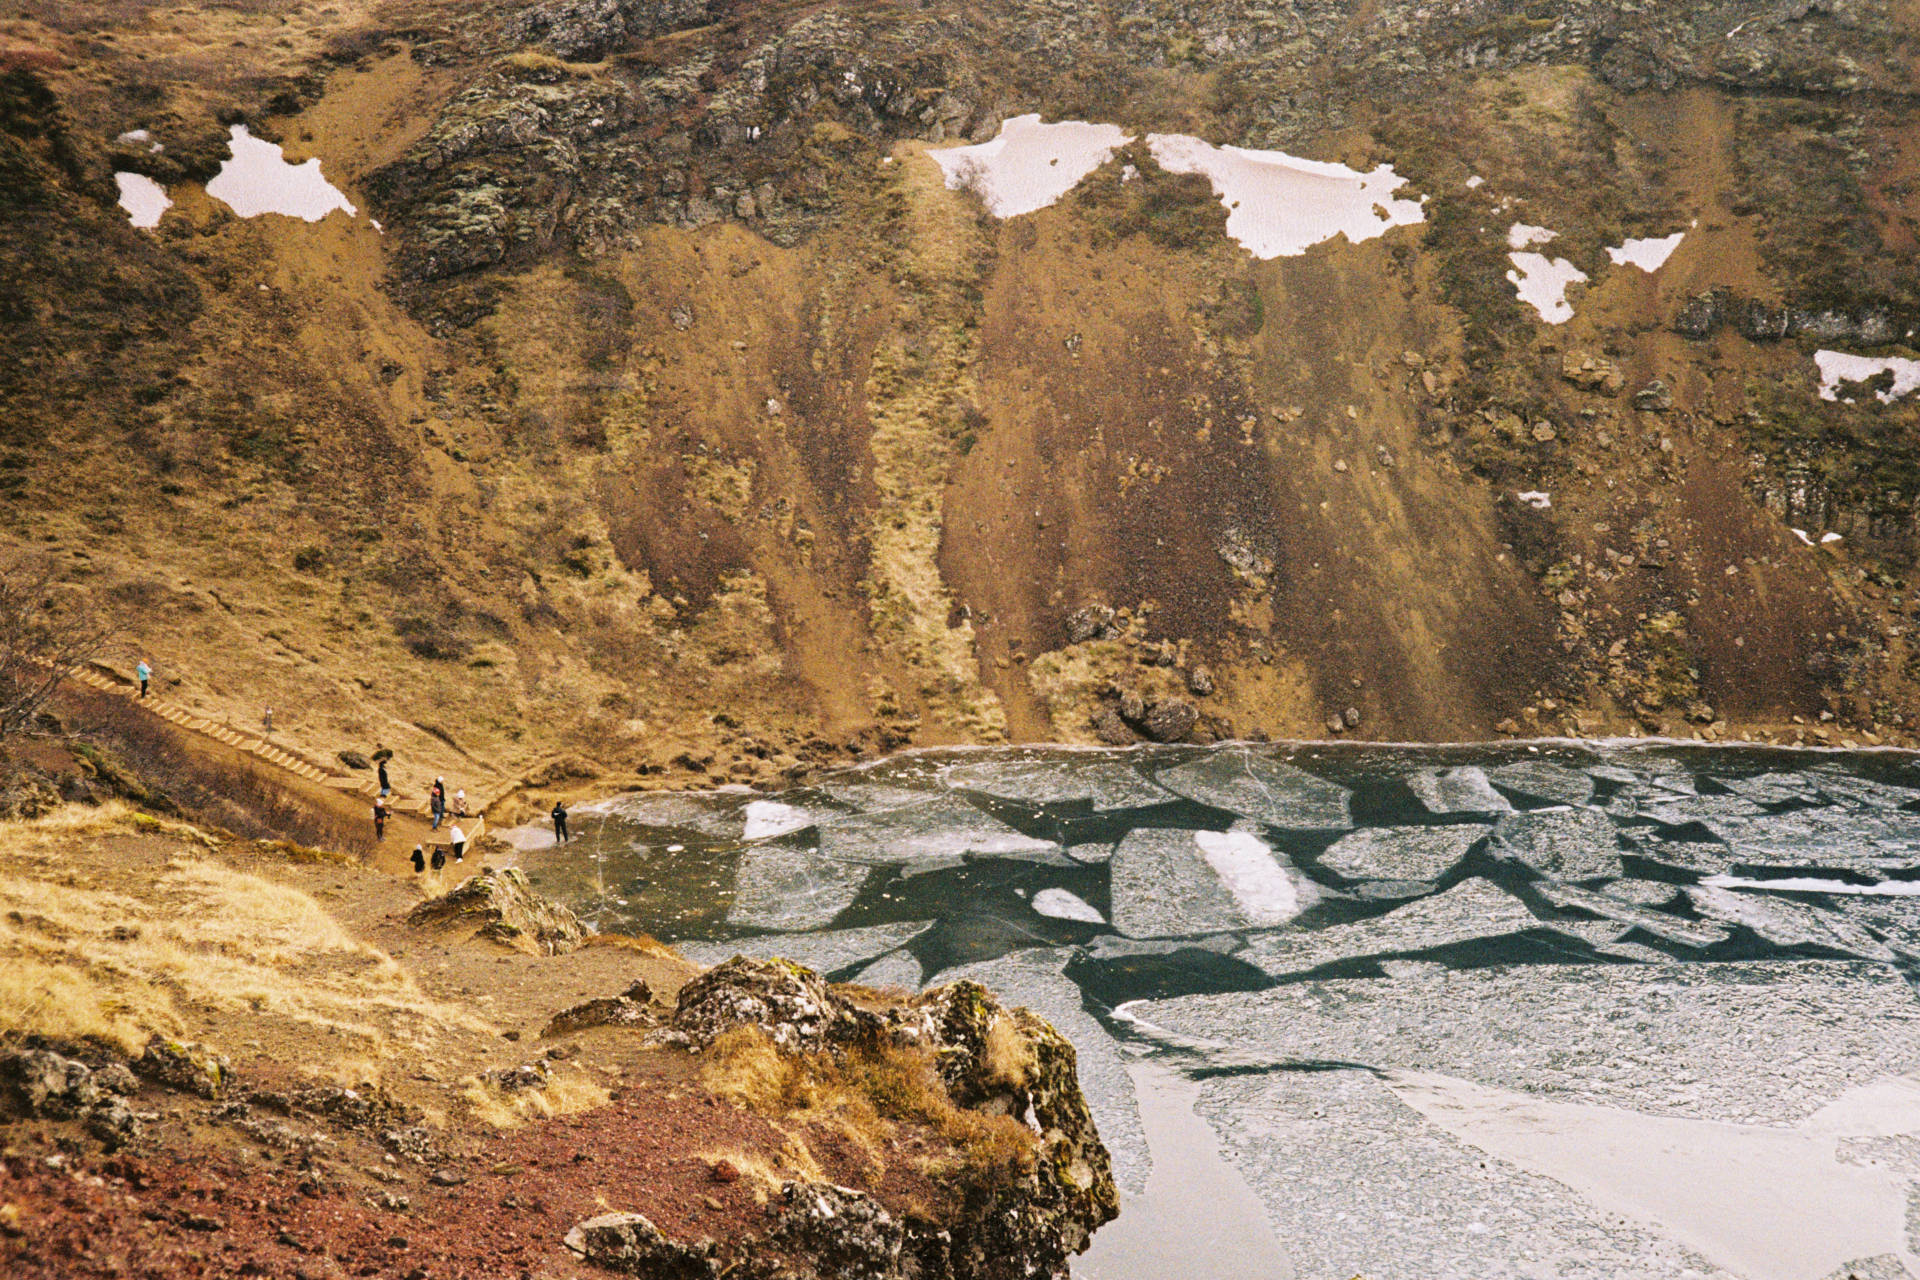 A photograph of a dormant volcanic crater covered in a layer of ice